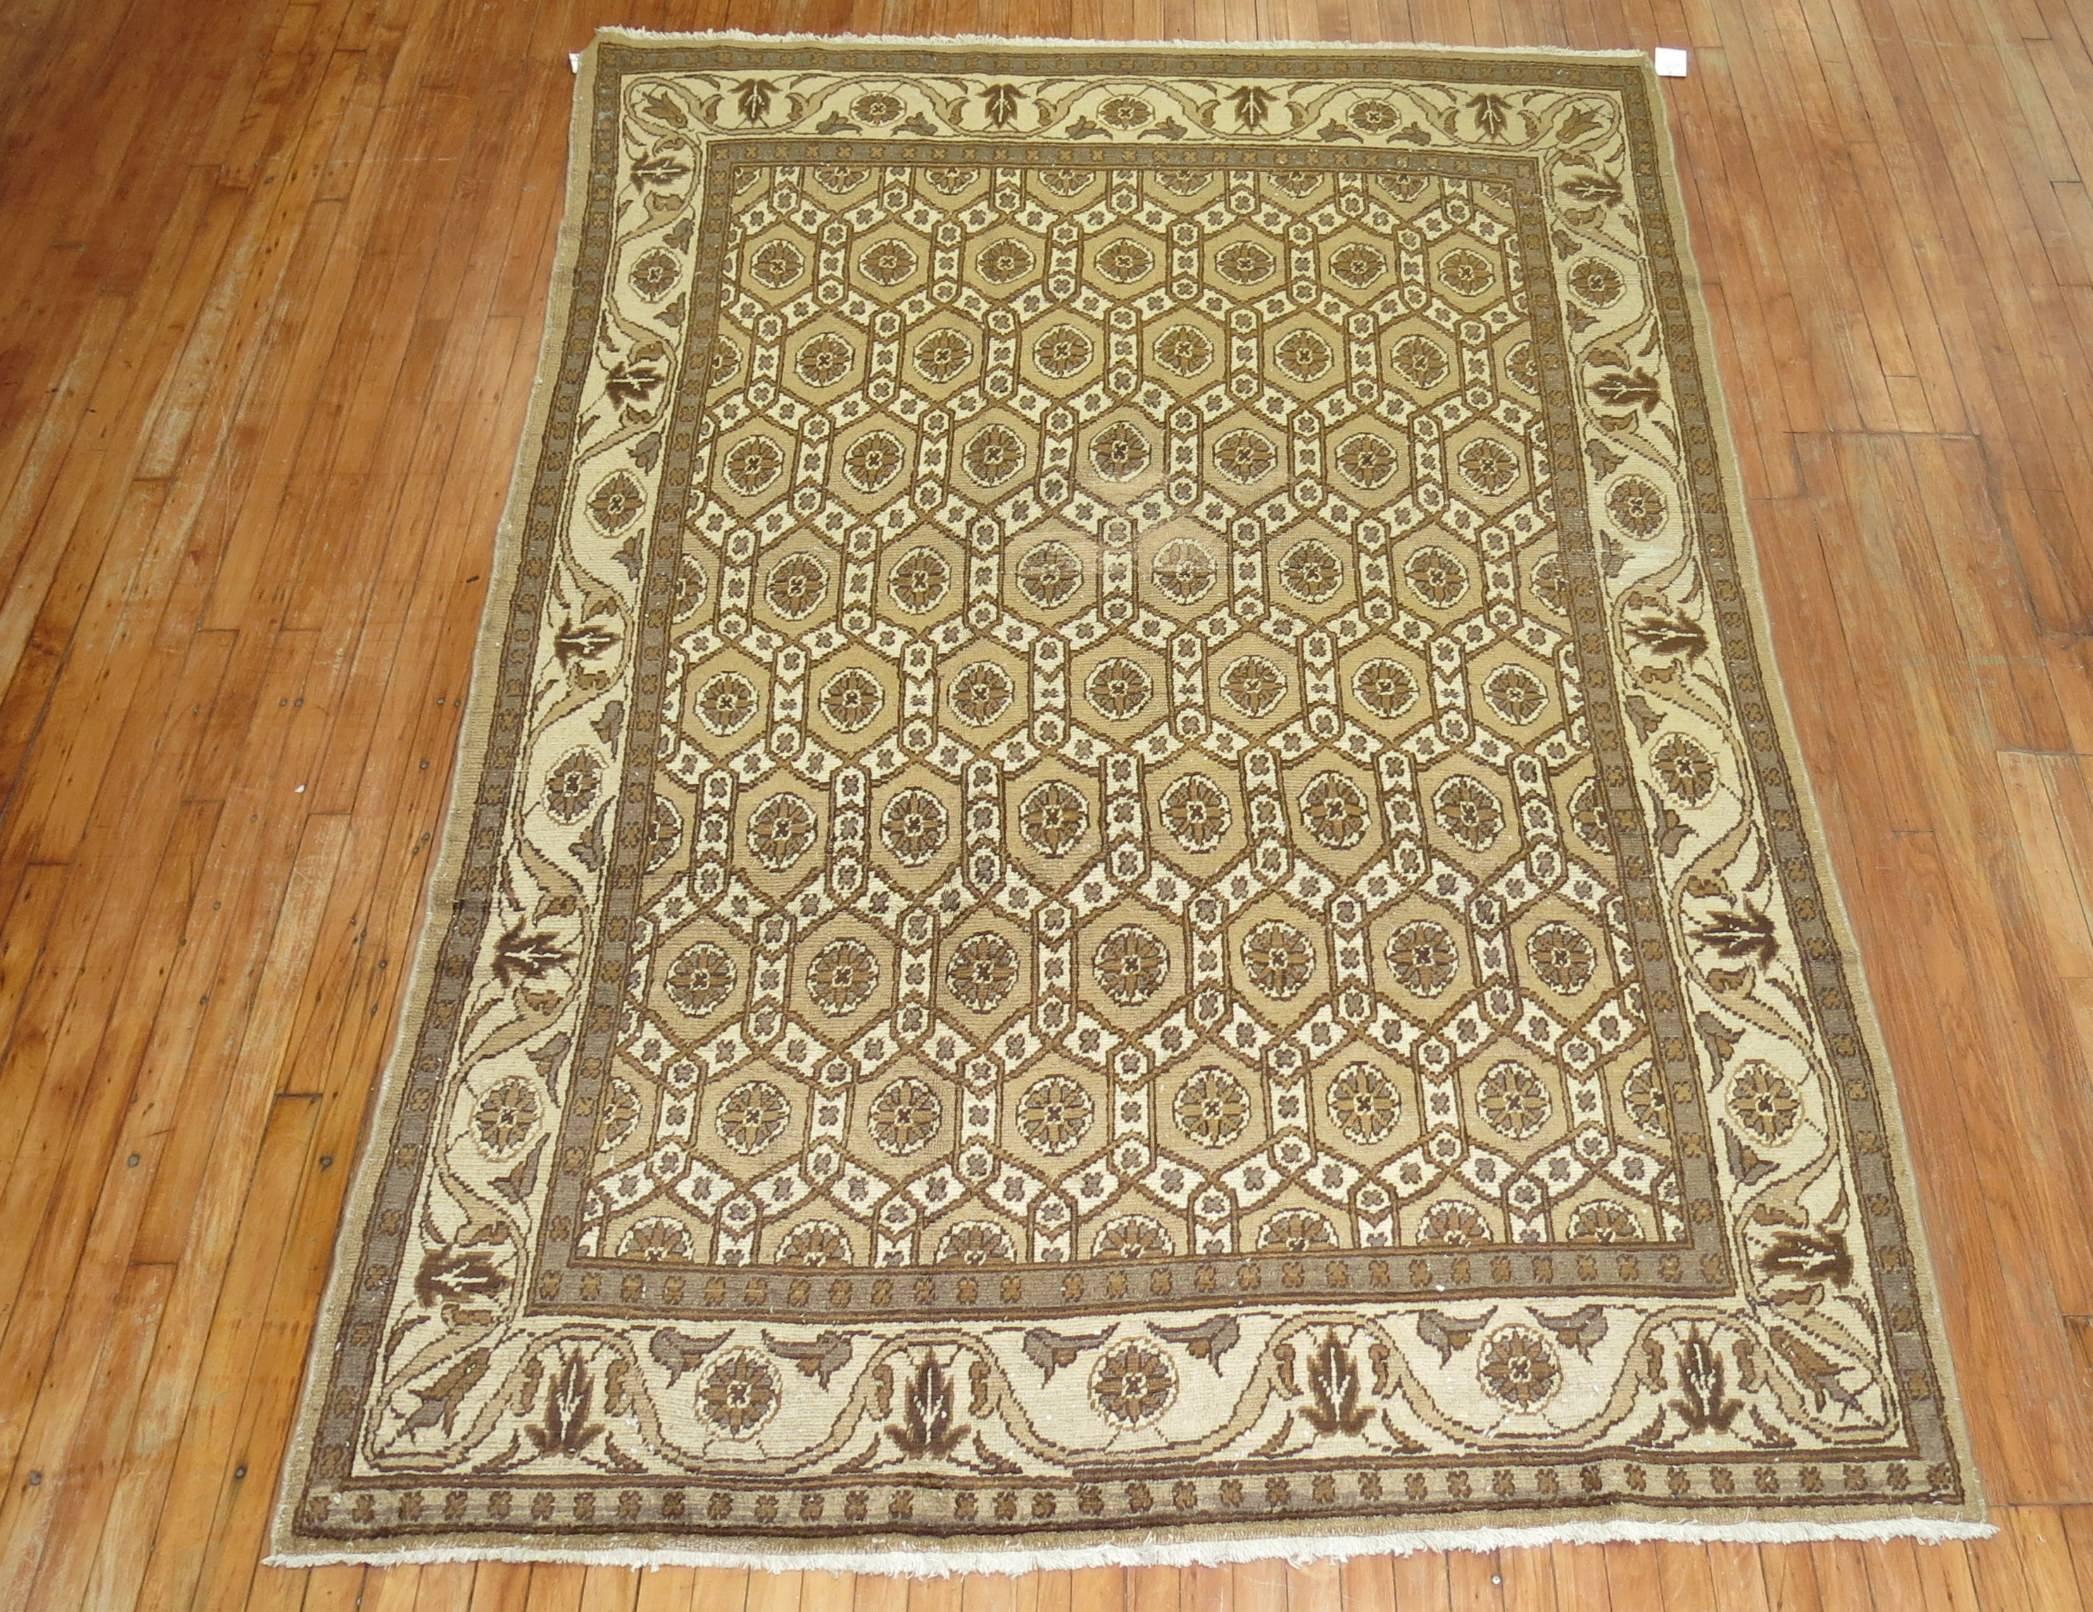 A mid-20th century Persian rug in various shades of brown.

Size: 6'2